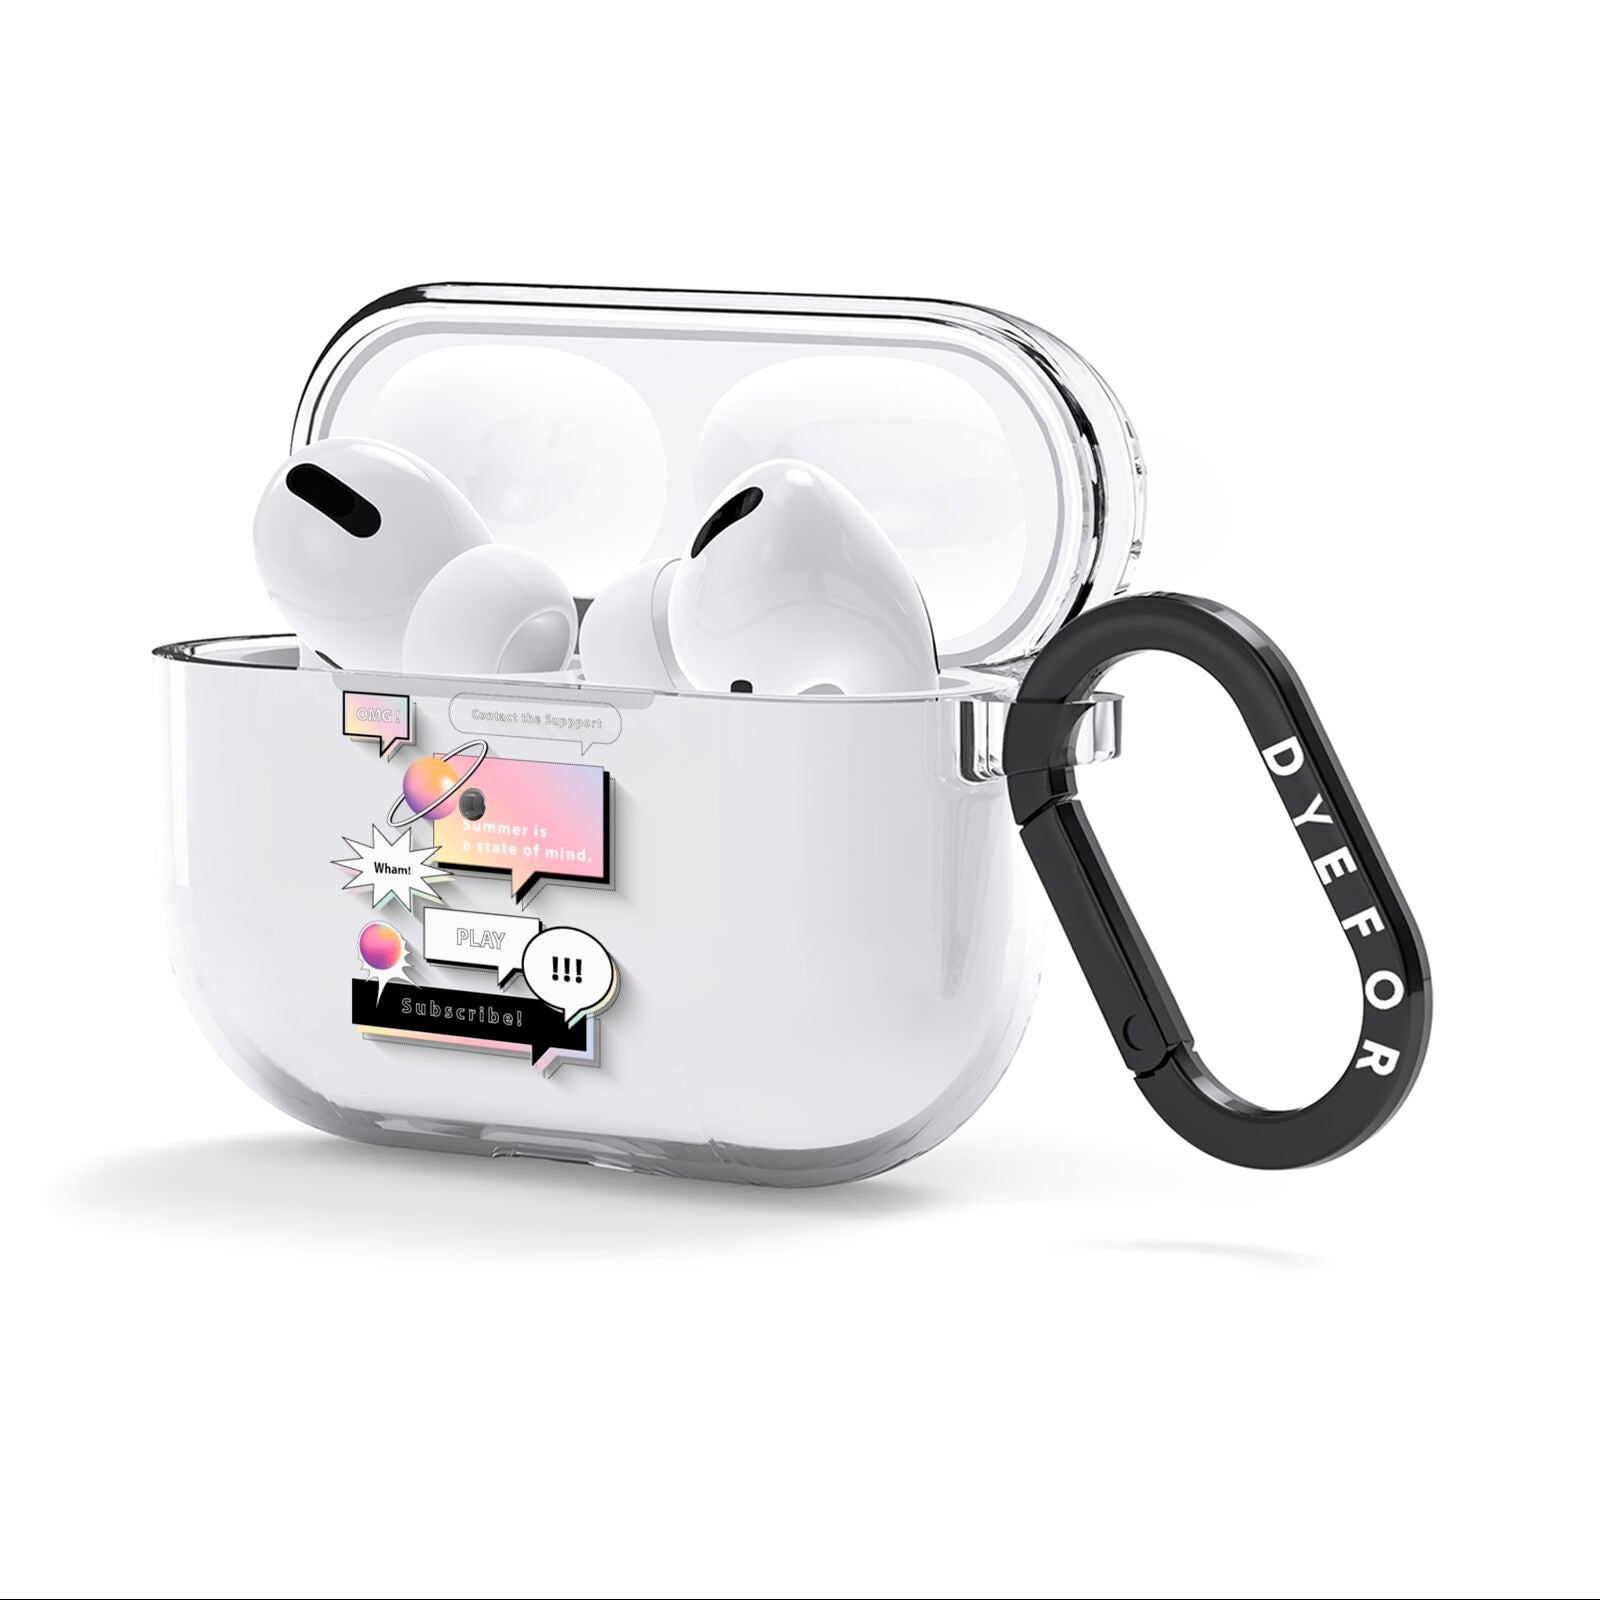 Summer Is A State Of Mind AirPods Clear Case 3rd Gen Side Image